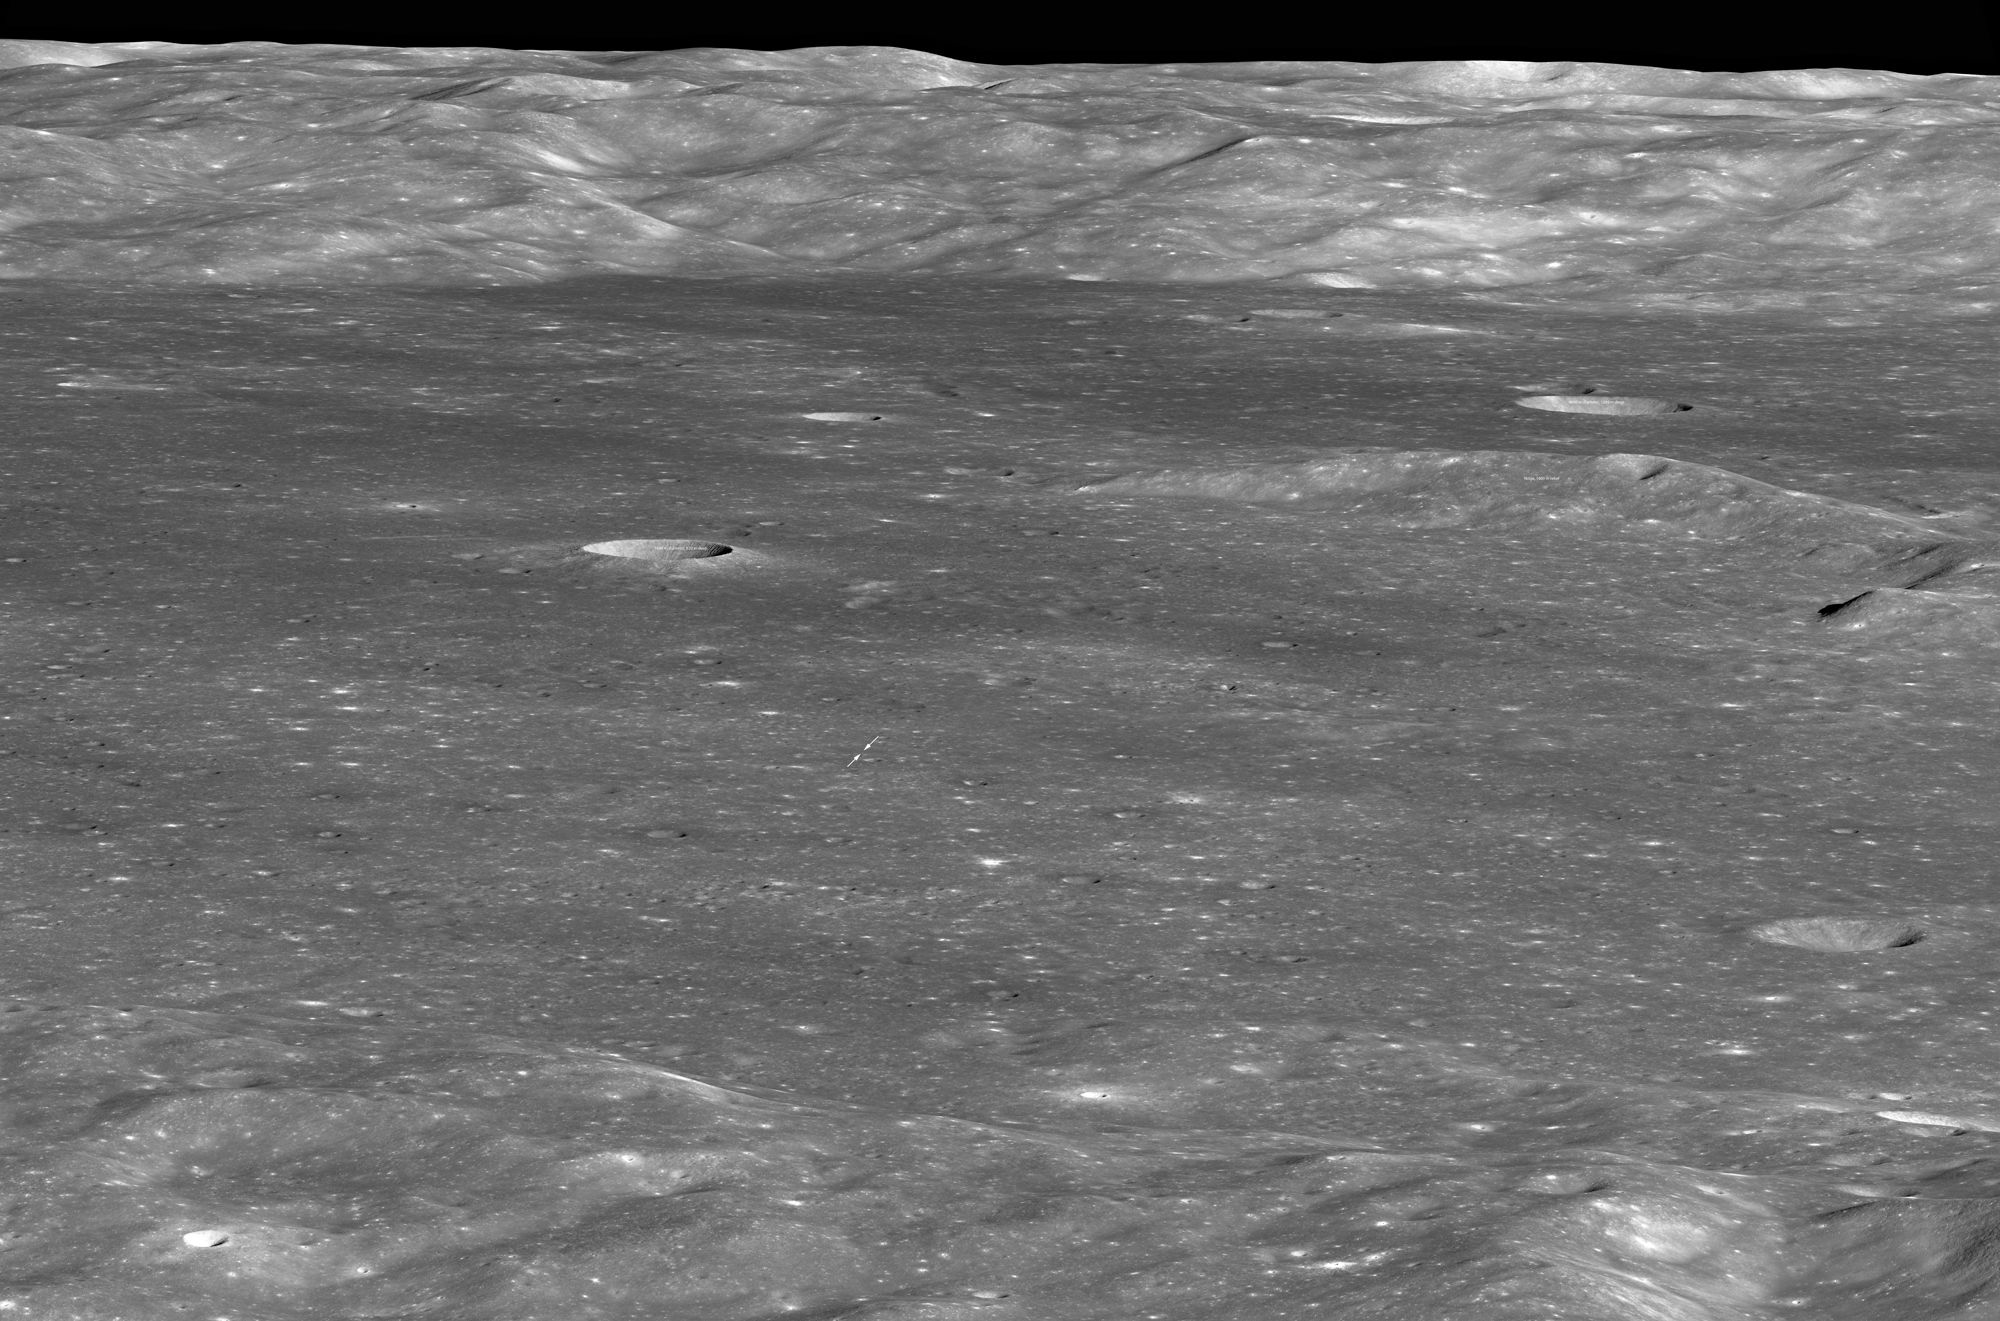 The Lunar Reconnaissance Orbiter took tis image of von Kármán crater on the Moon’s far side, showing the location of the Chinese lander and rover Chang’e-4 and Yutu-2. Credit: NASA/GSFC/Arizona State University